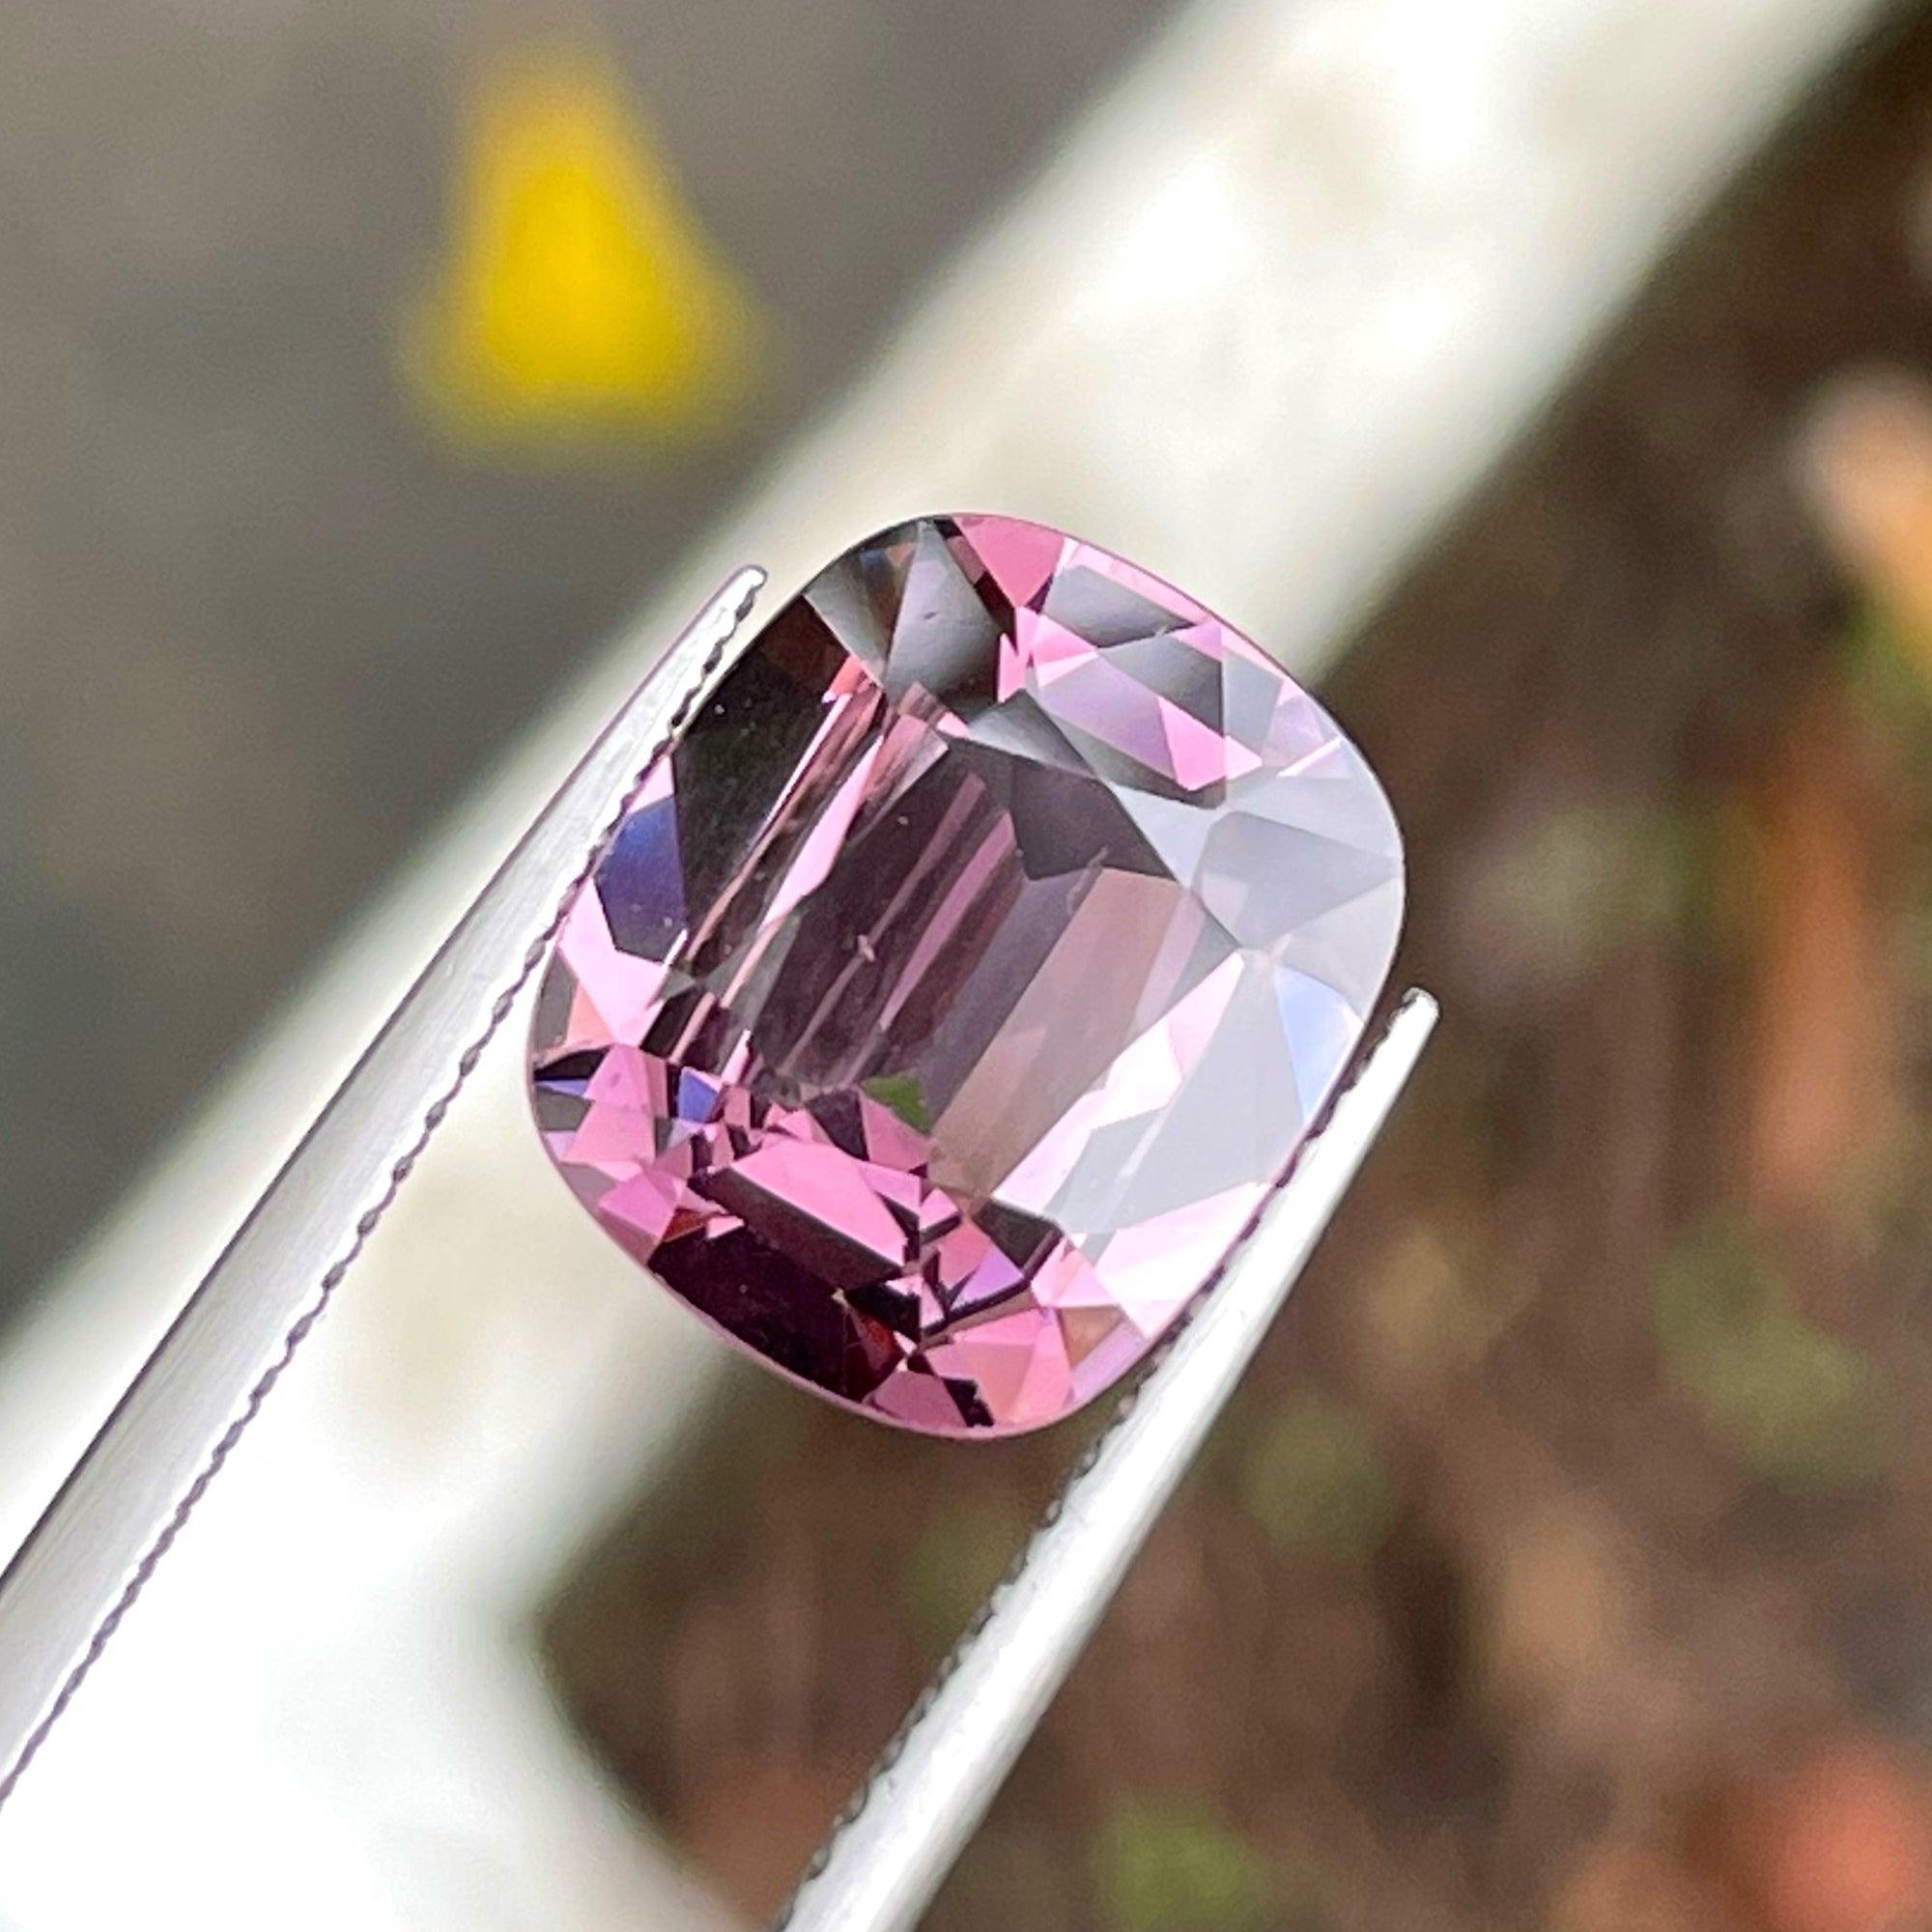 Precious Purplish Pink Natural Sapphire Gemstone of 5.05 carats from Burma has a wonderful cut in a Cushion shape, incredible Purplish Pink Color, Loose Sapphire. This gem is Vvs Clarity.

Product Information:
GEMSTONE TYPE:	Precious Purplish Pink